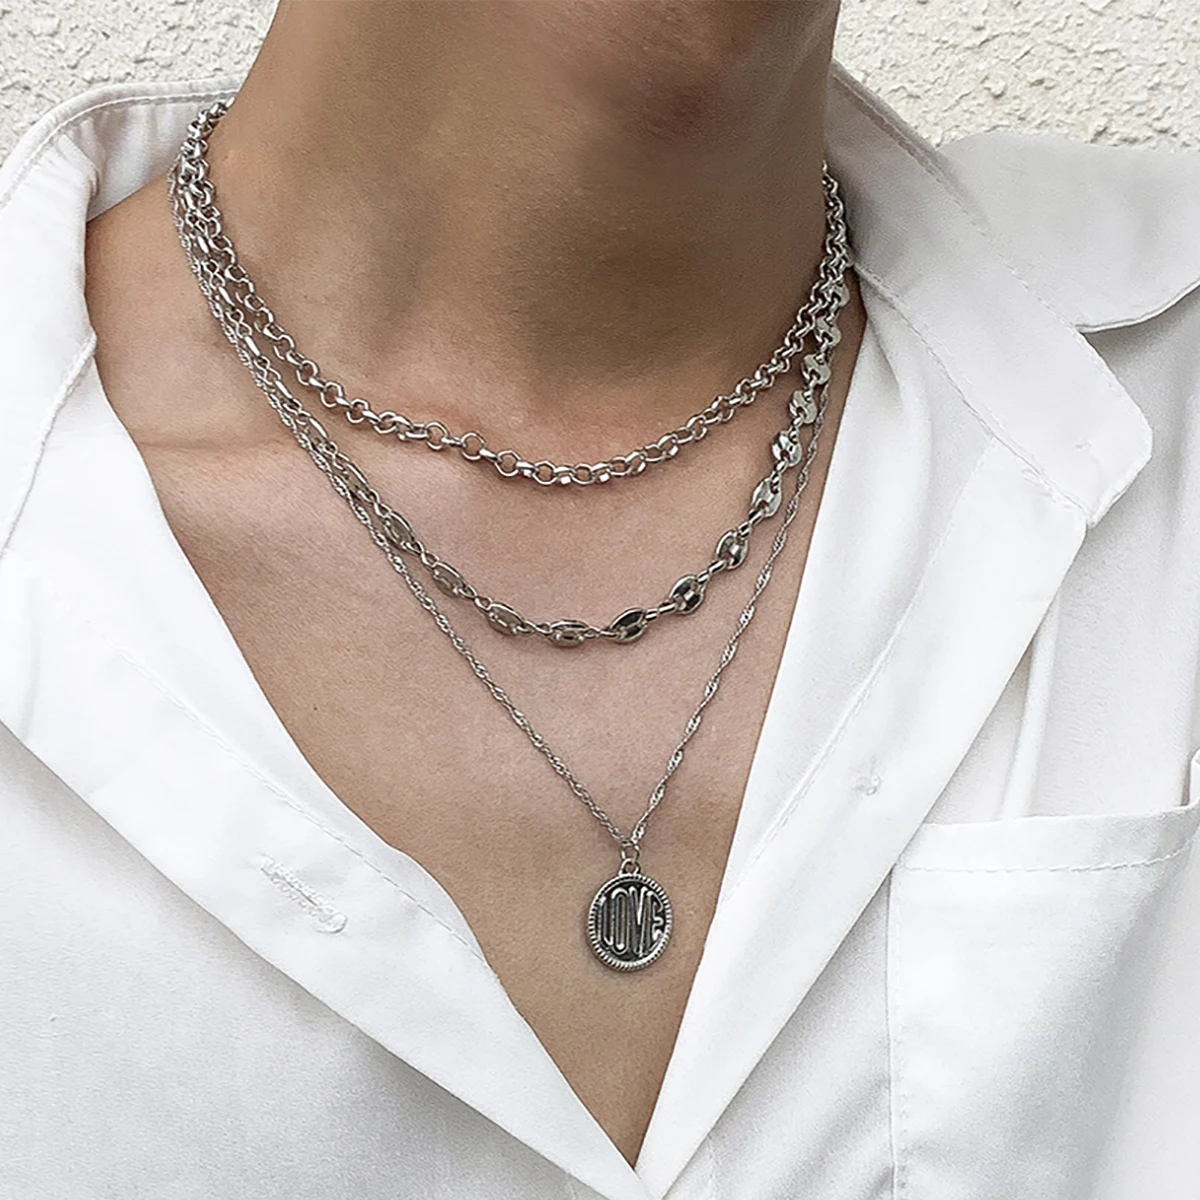 

KunJoe Multilayer Punk Letter LOVE Coin Pendant Necklace for Men Goth Silver Color Coffee Beans Pig Nose Link Chain Necklace